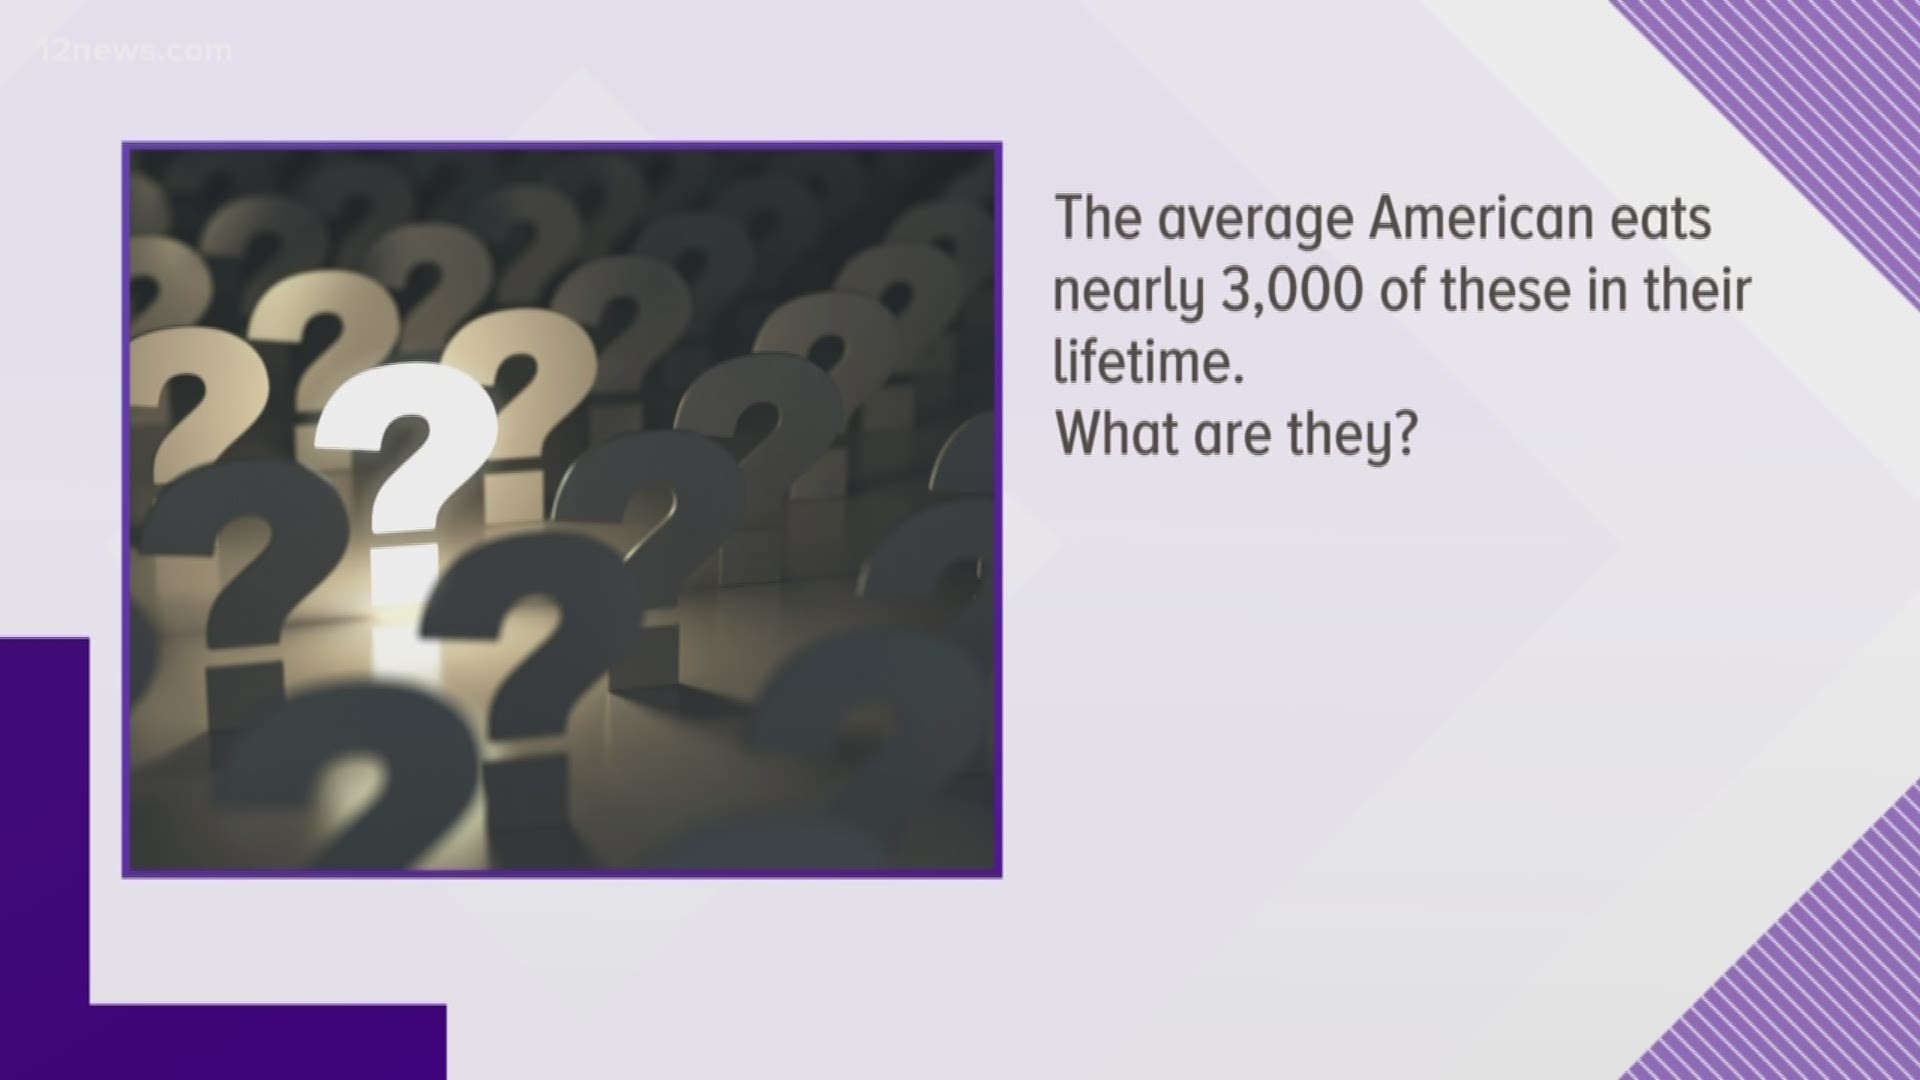 An average American will eat nearly 3,000 of what over their life?